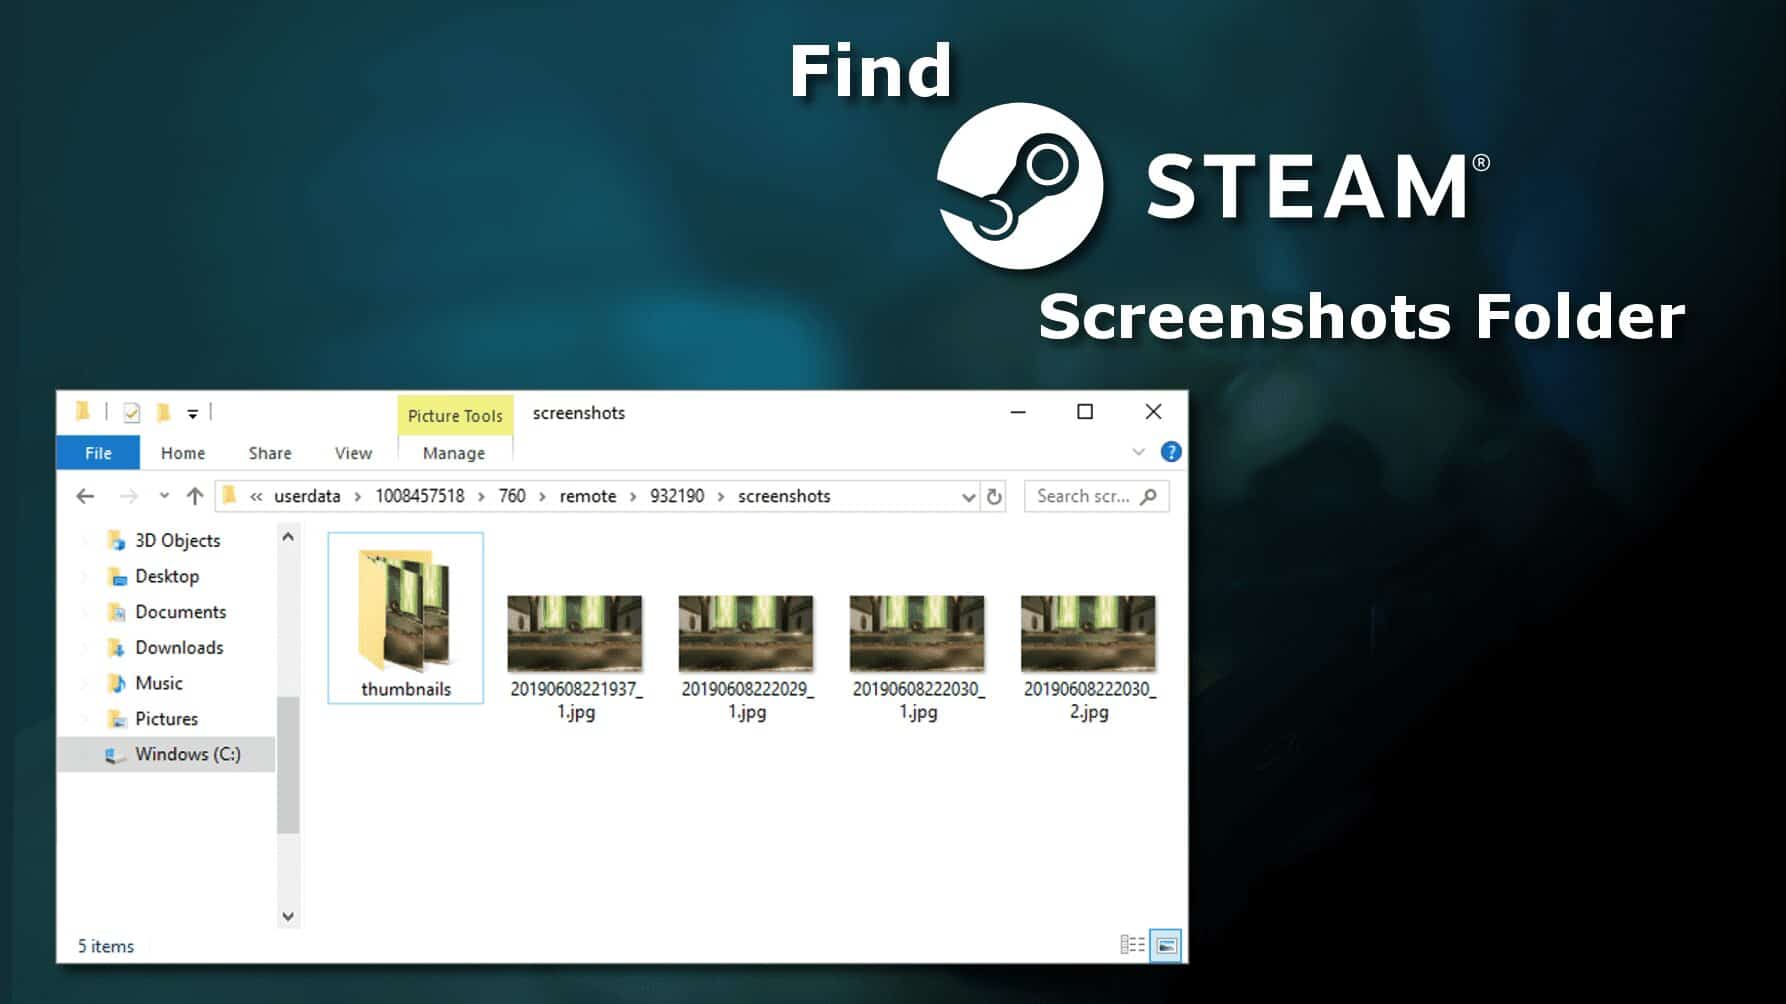 Guide on how to find steam screenshot folder